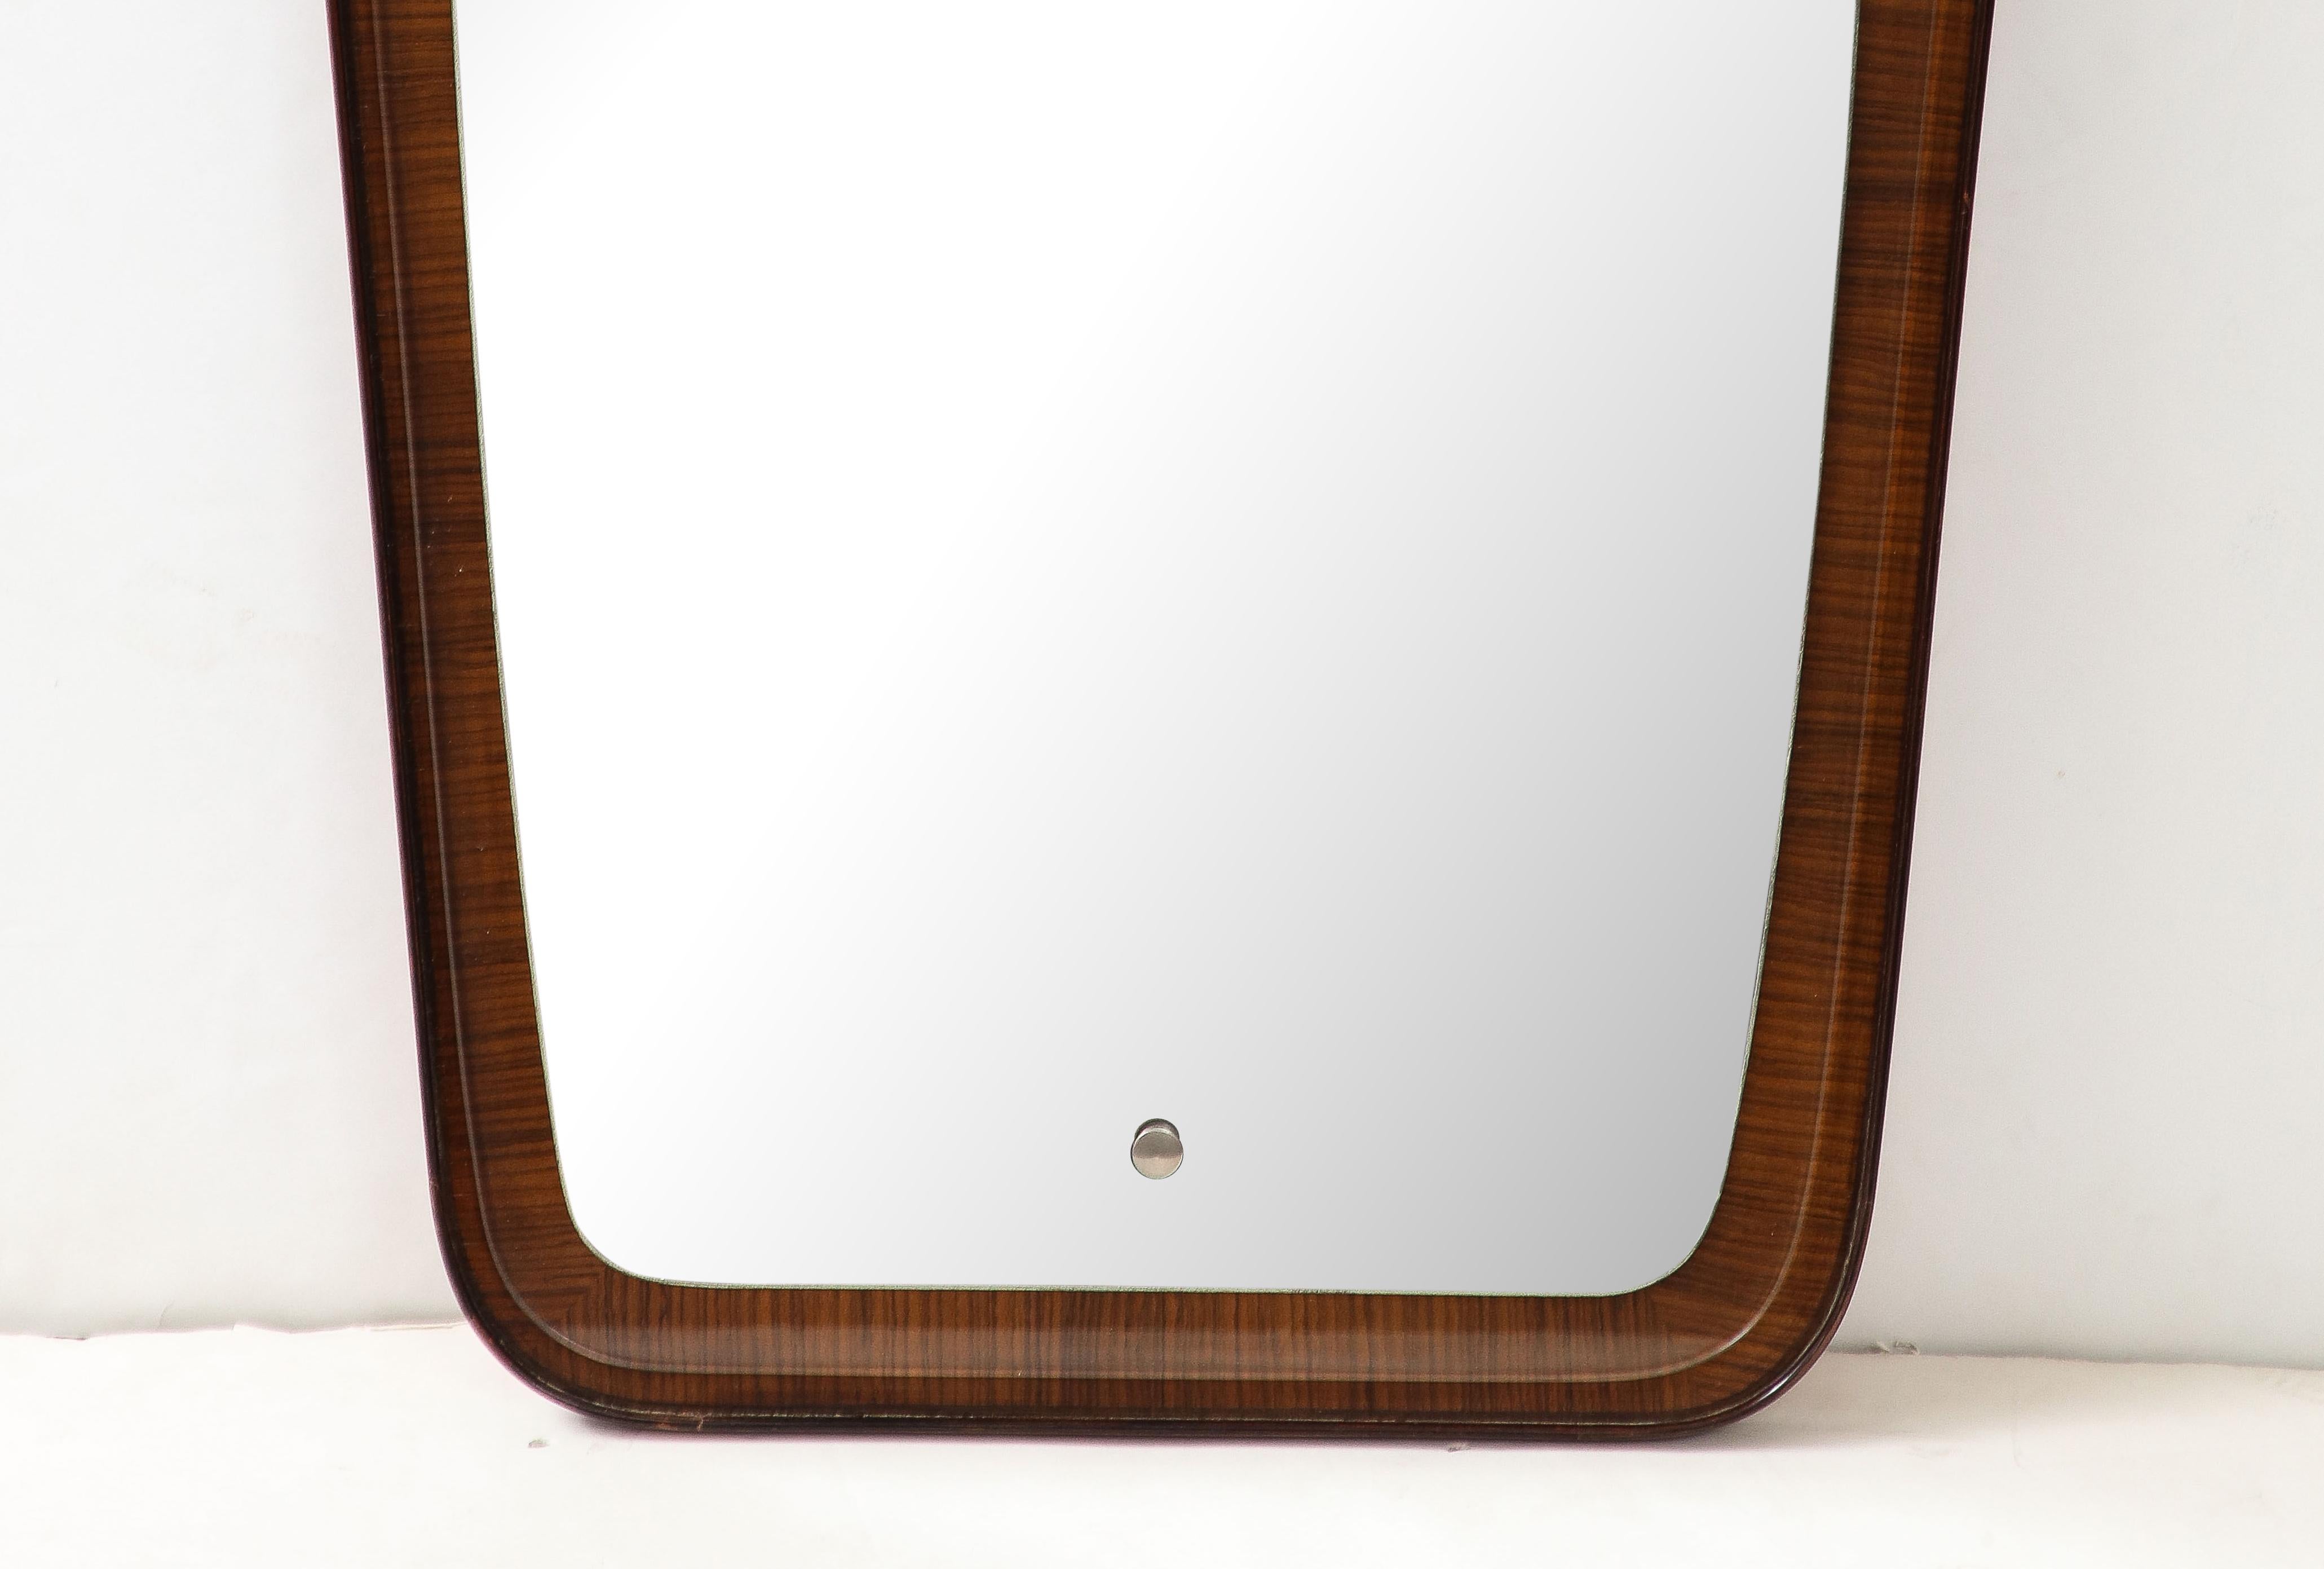 Mahogany Wall Mirror with Inlaid Metal, Italy, c. 1960 For Sale 2